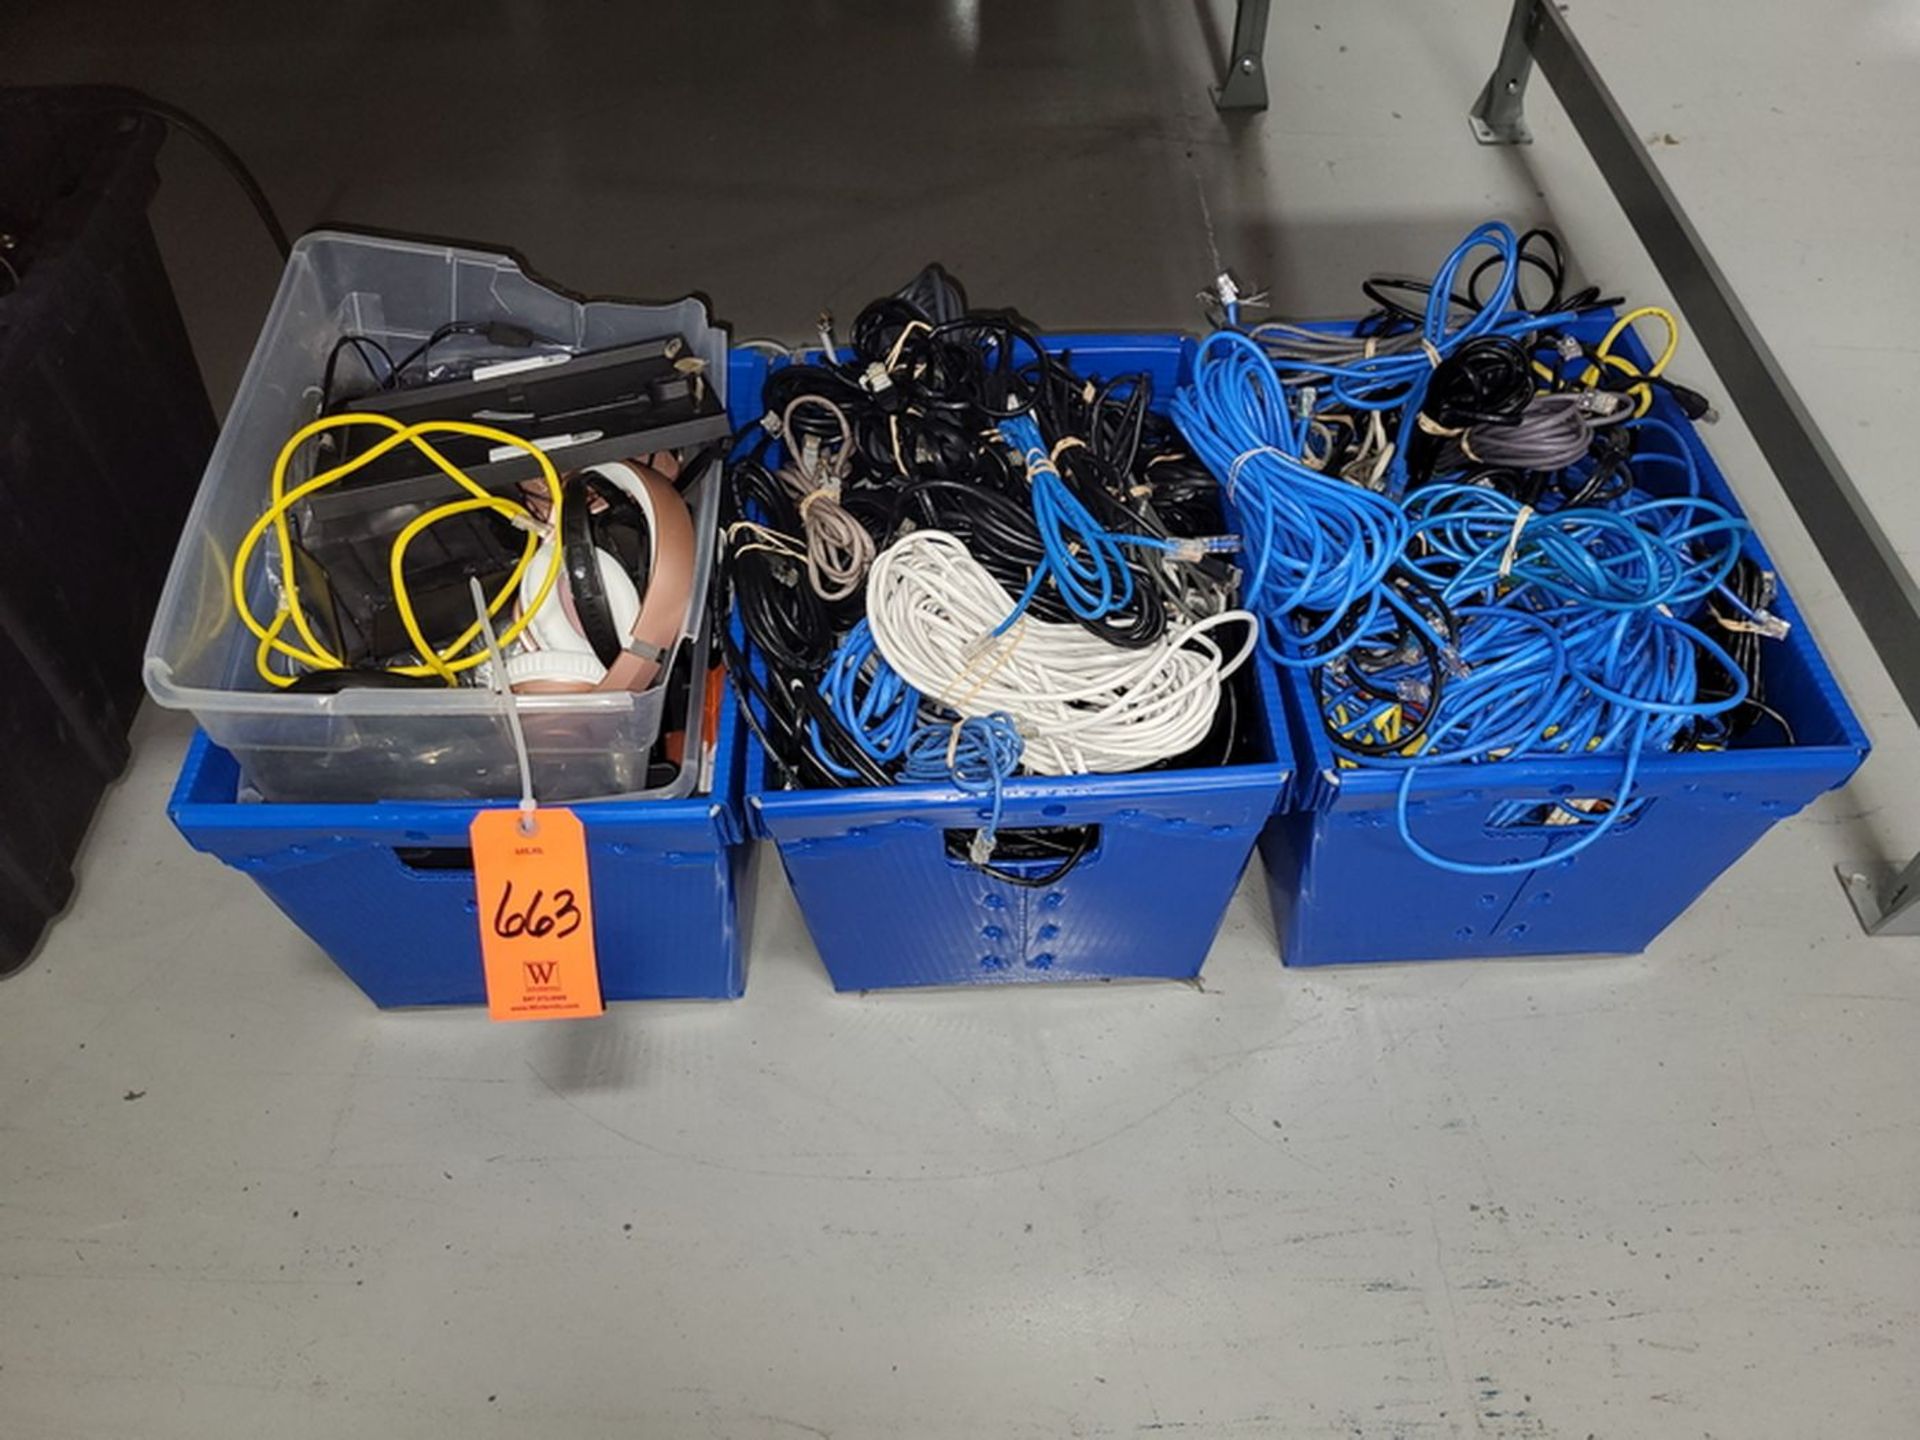 Lot - Ethernet Cables, Extension Cords & Ergonomic Pads, in (4) Bins